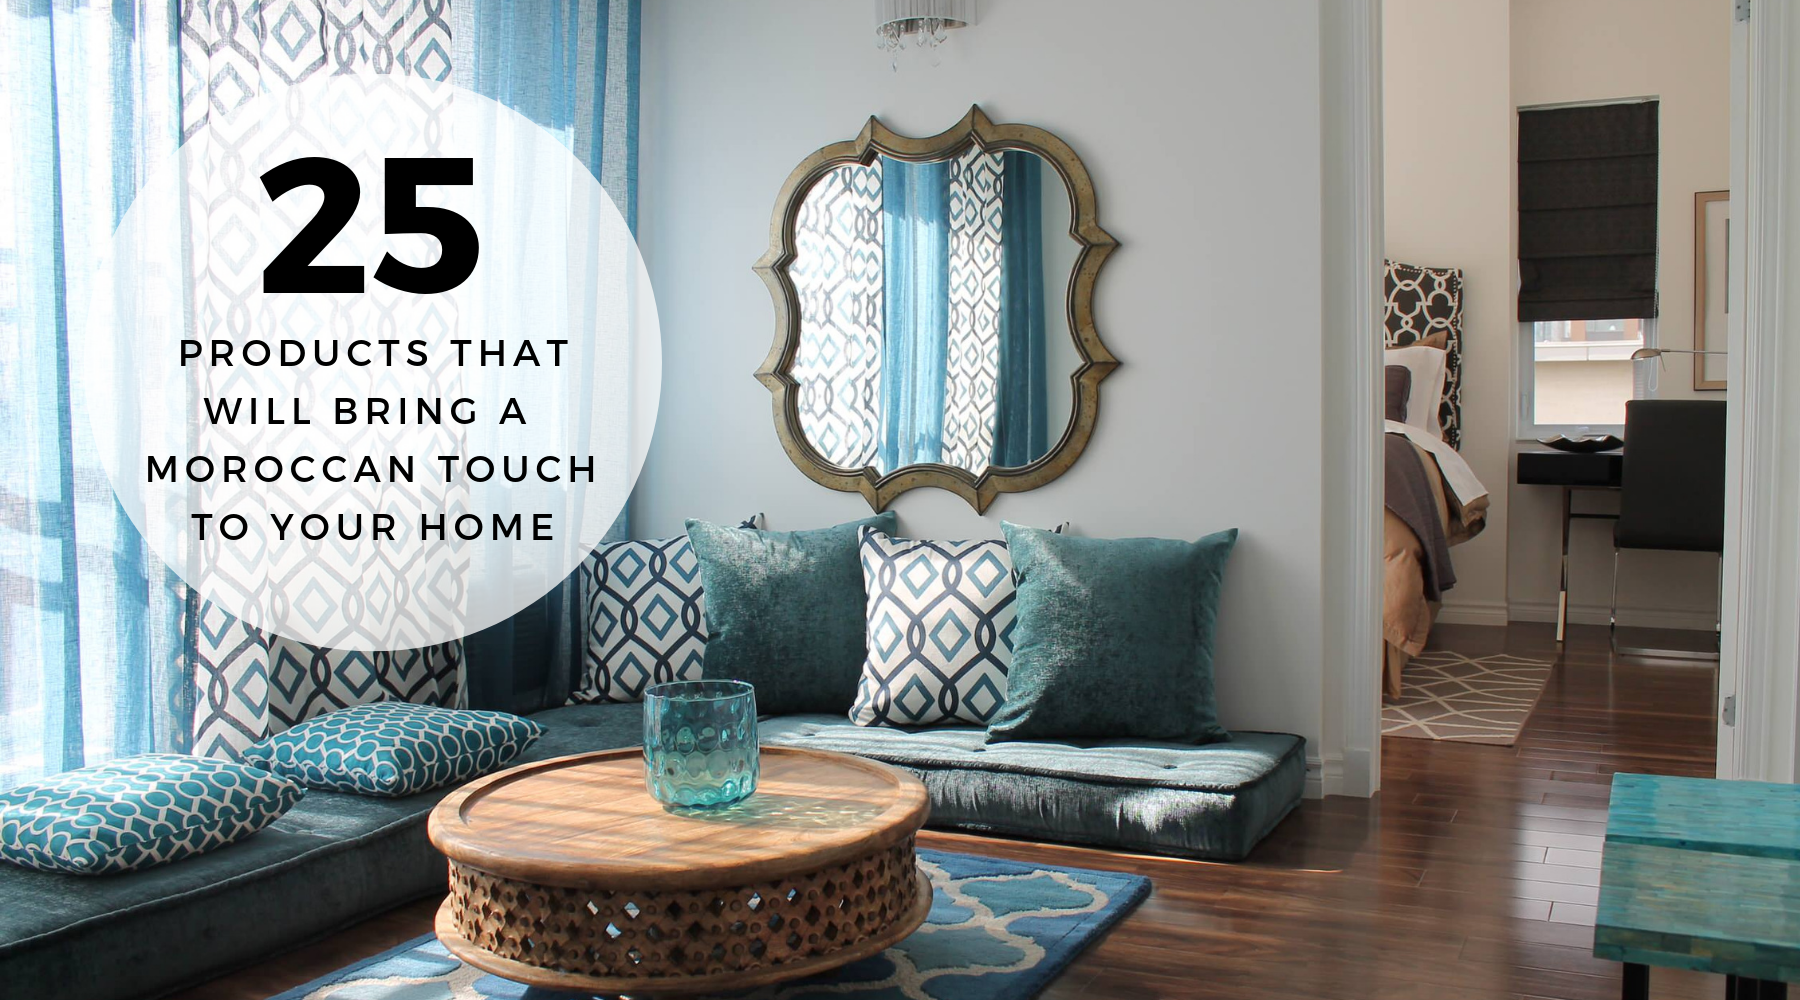 25 Products That Will Bring a Moroccan Touch Your Home